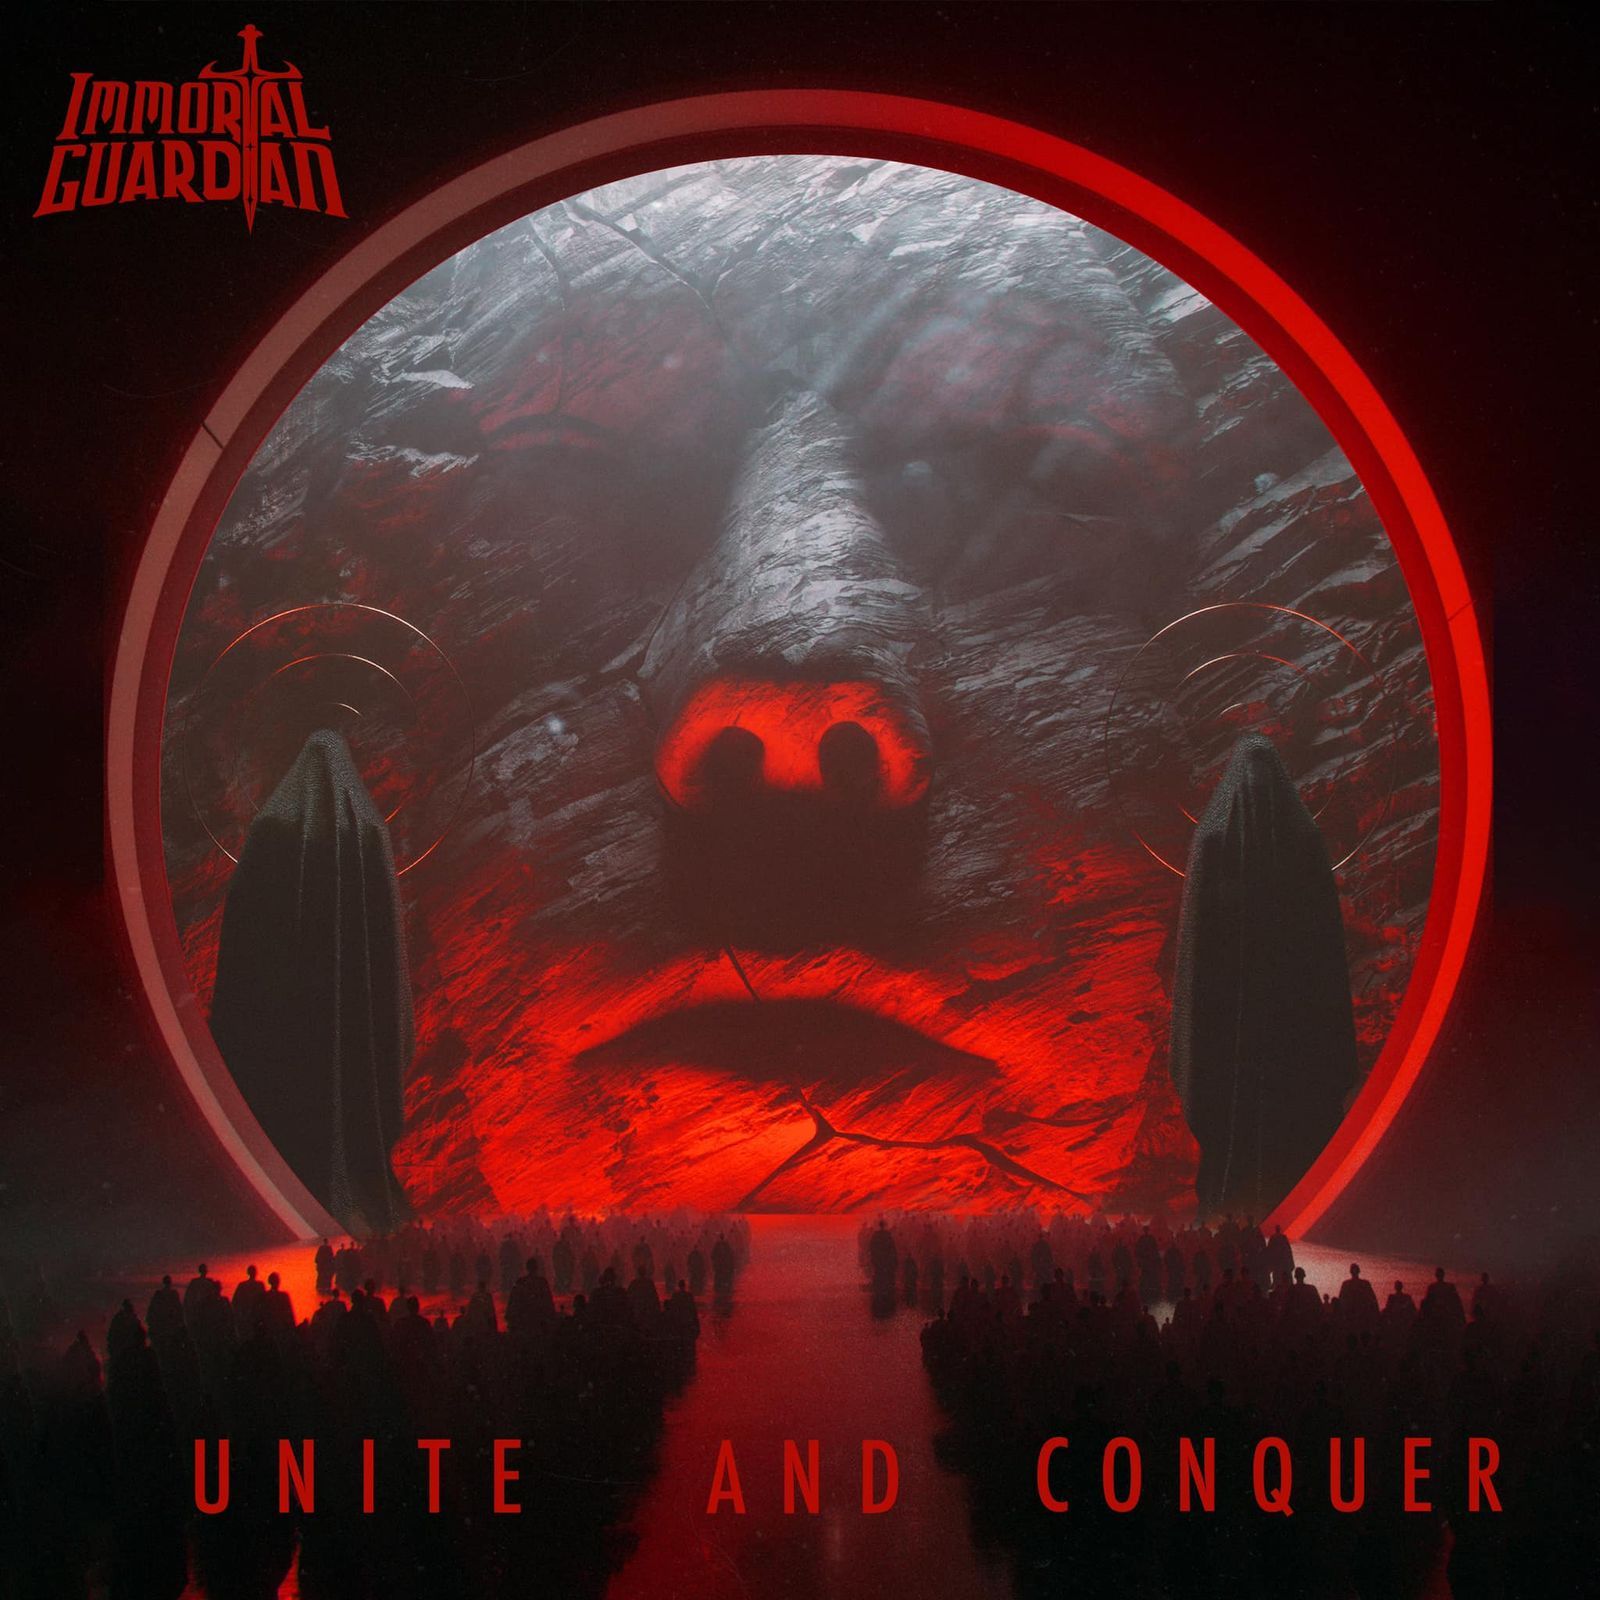 Immortal Guardian - Unite And Conquer (lyric video)